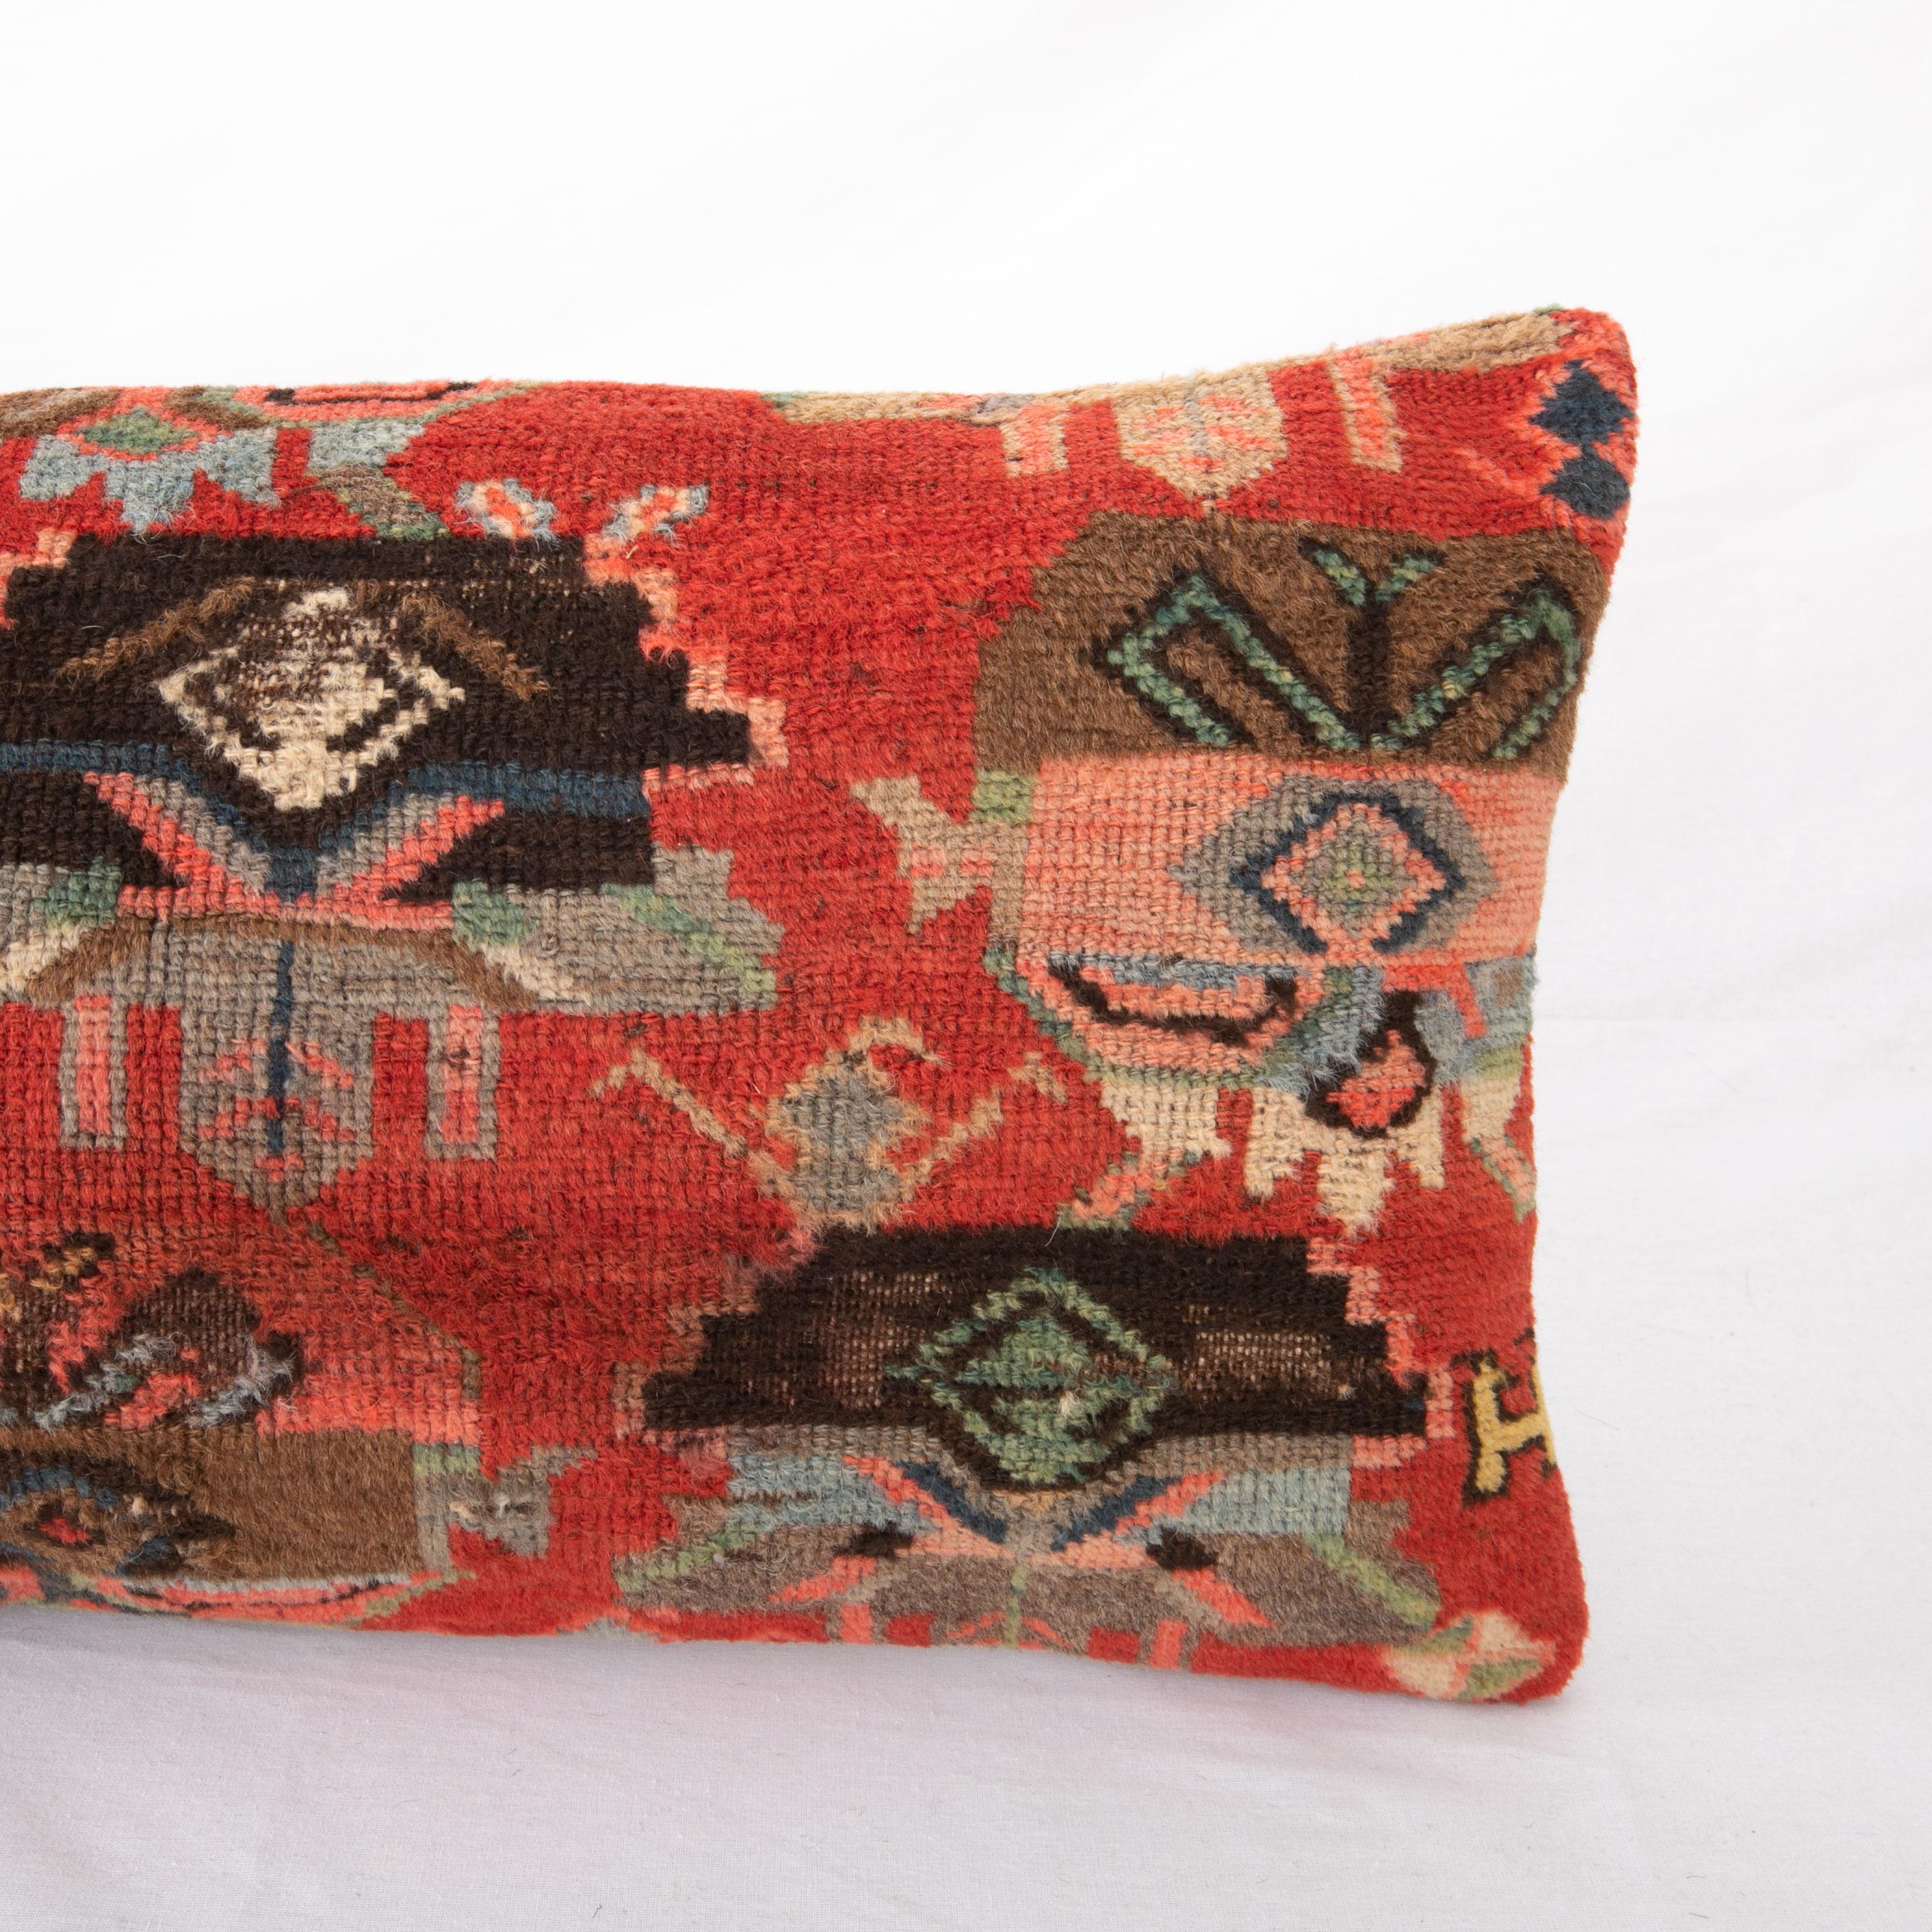 Armenian Rug Pillow Cover Made from a Caucasian Karabagh Rug, Late 19th / Early 20th C For Sale